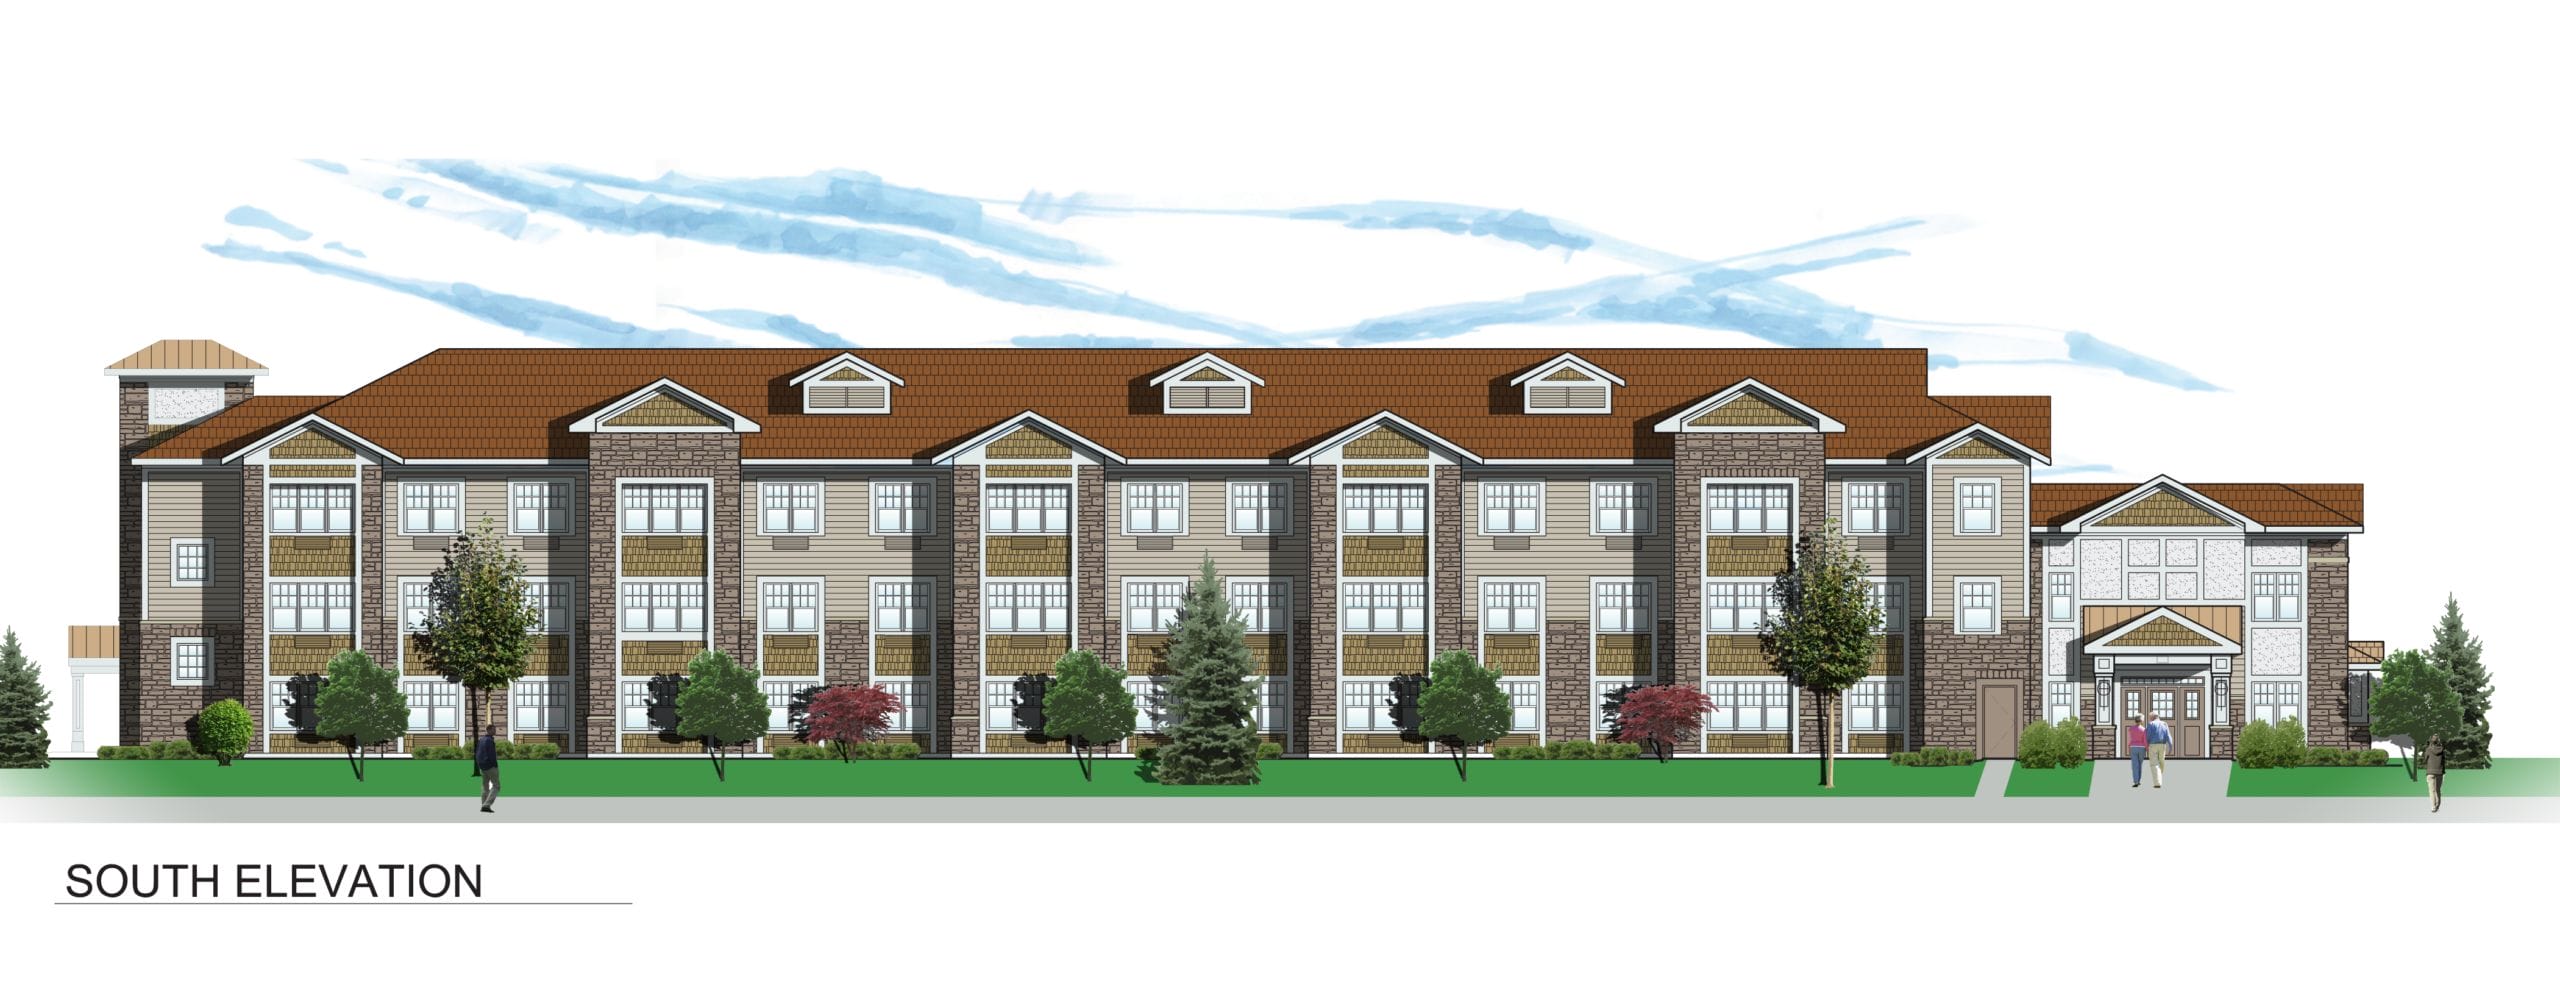 Skender Breaks Ground on Independent Senior Living Facility in Crystal Lake, IL